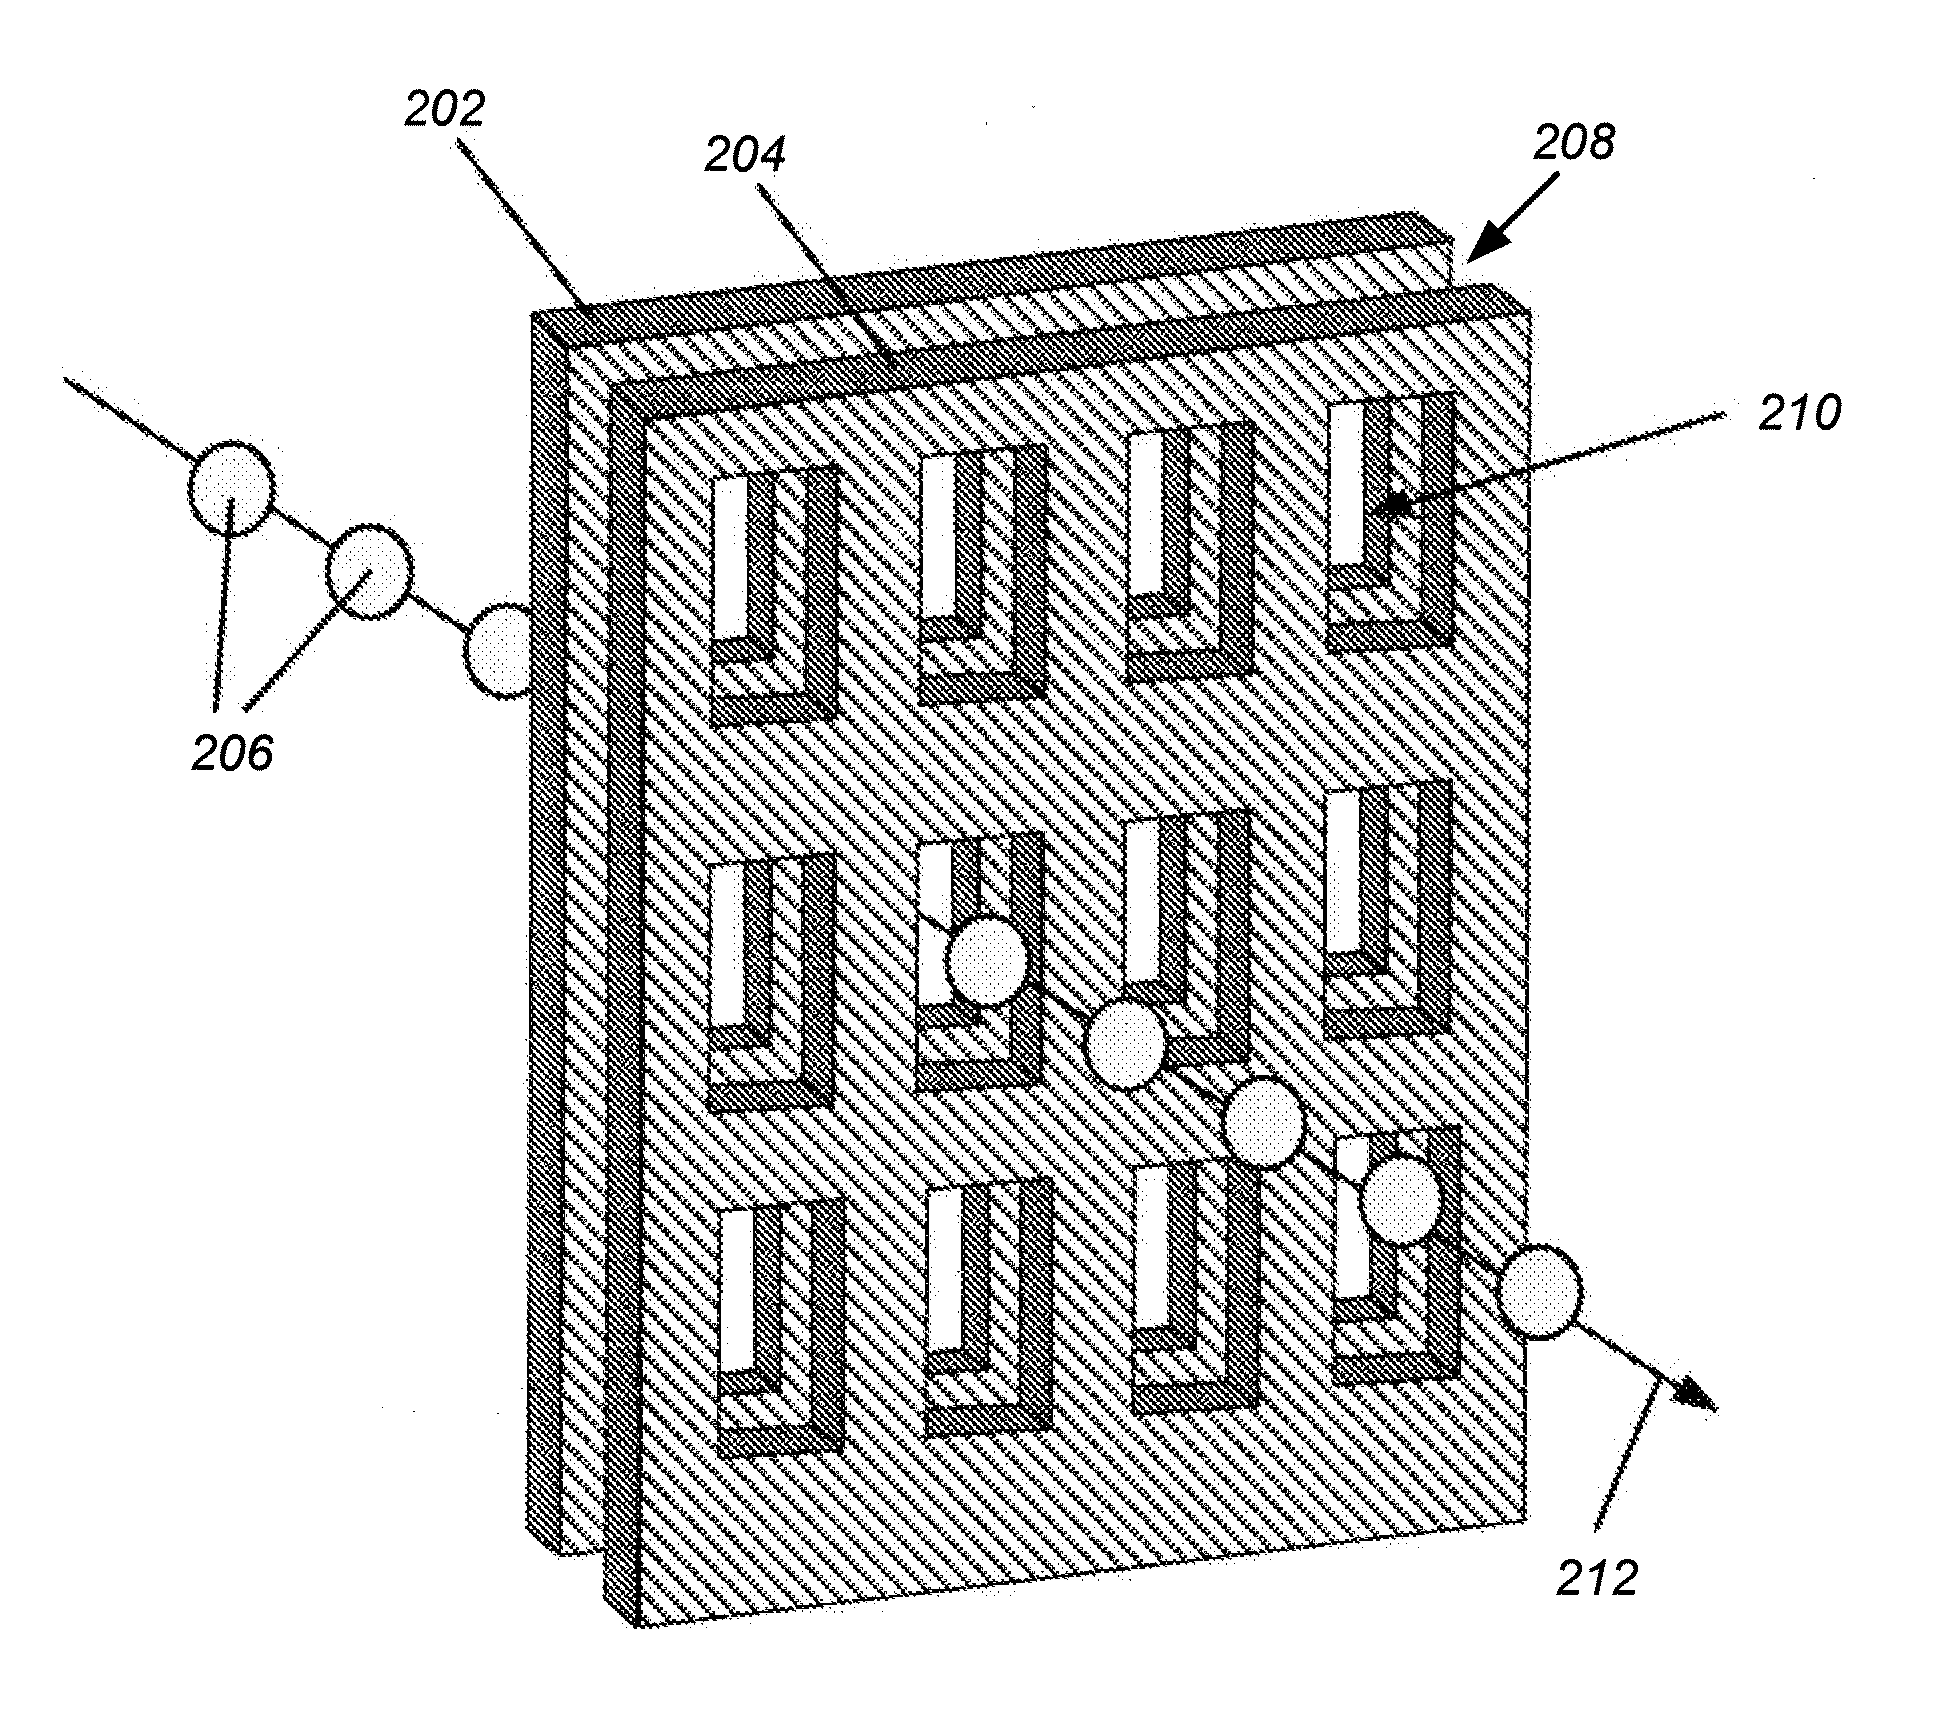 Overmoded distributed interaction network